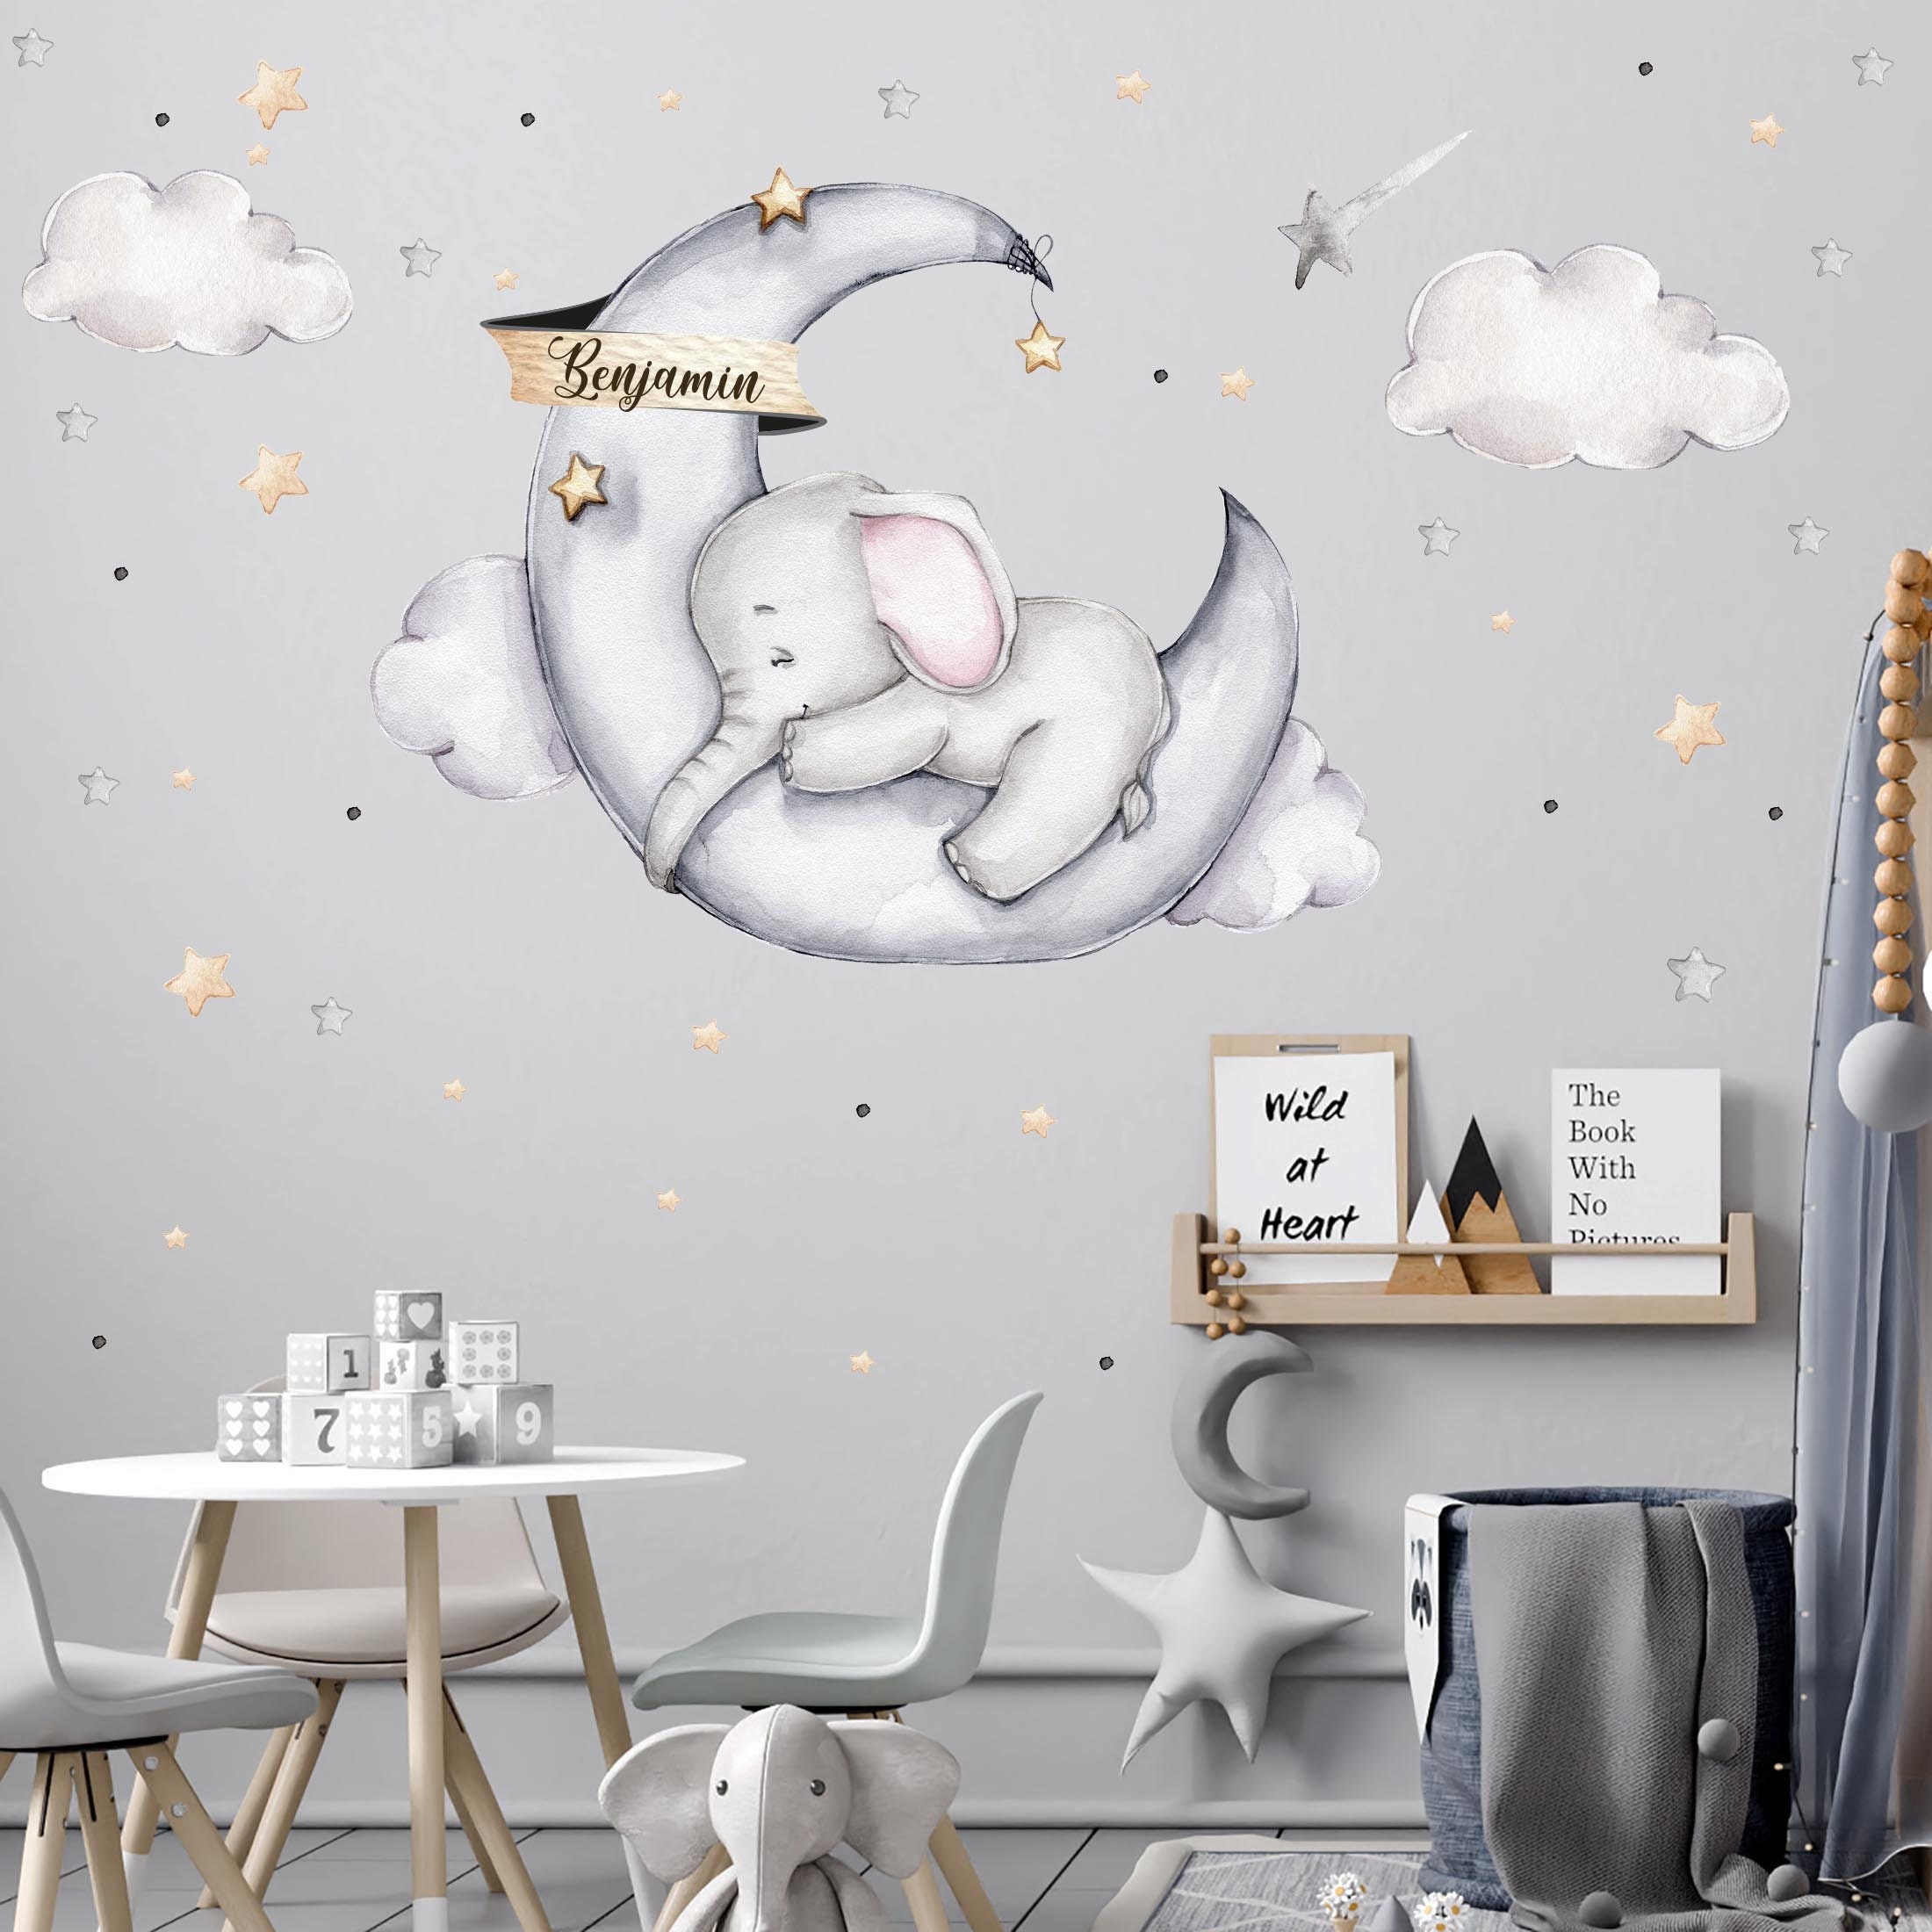 Etsy Sticker V329 Moon Elephant Name Children\'s NAME Decal Sticker Sticker With Sticker Wall Elephant Wall on - the WISH Room Name With